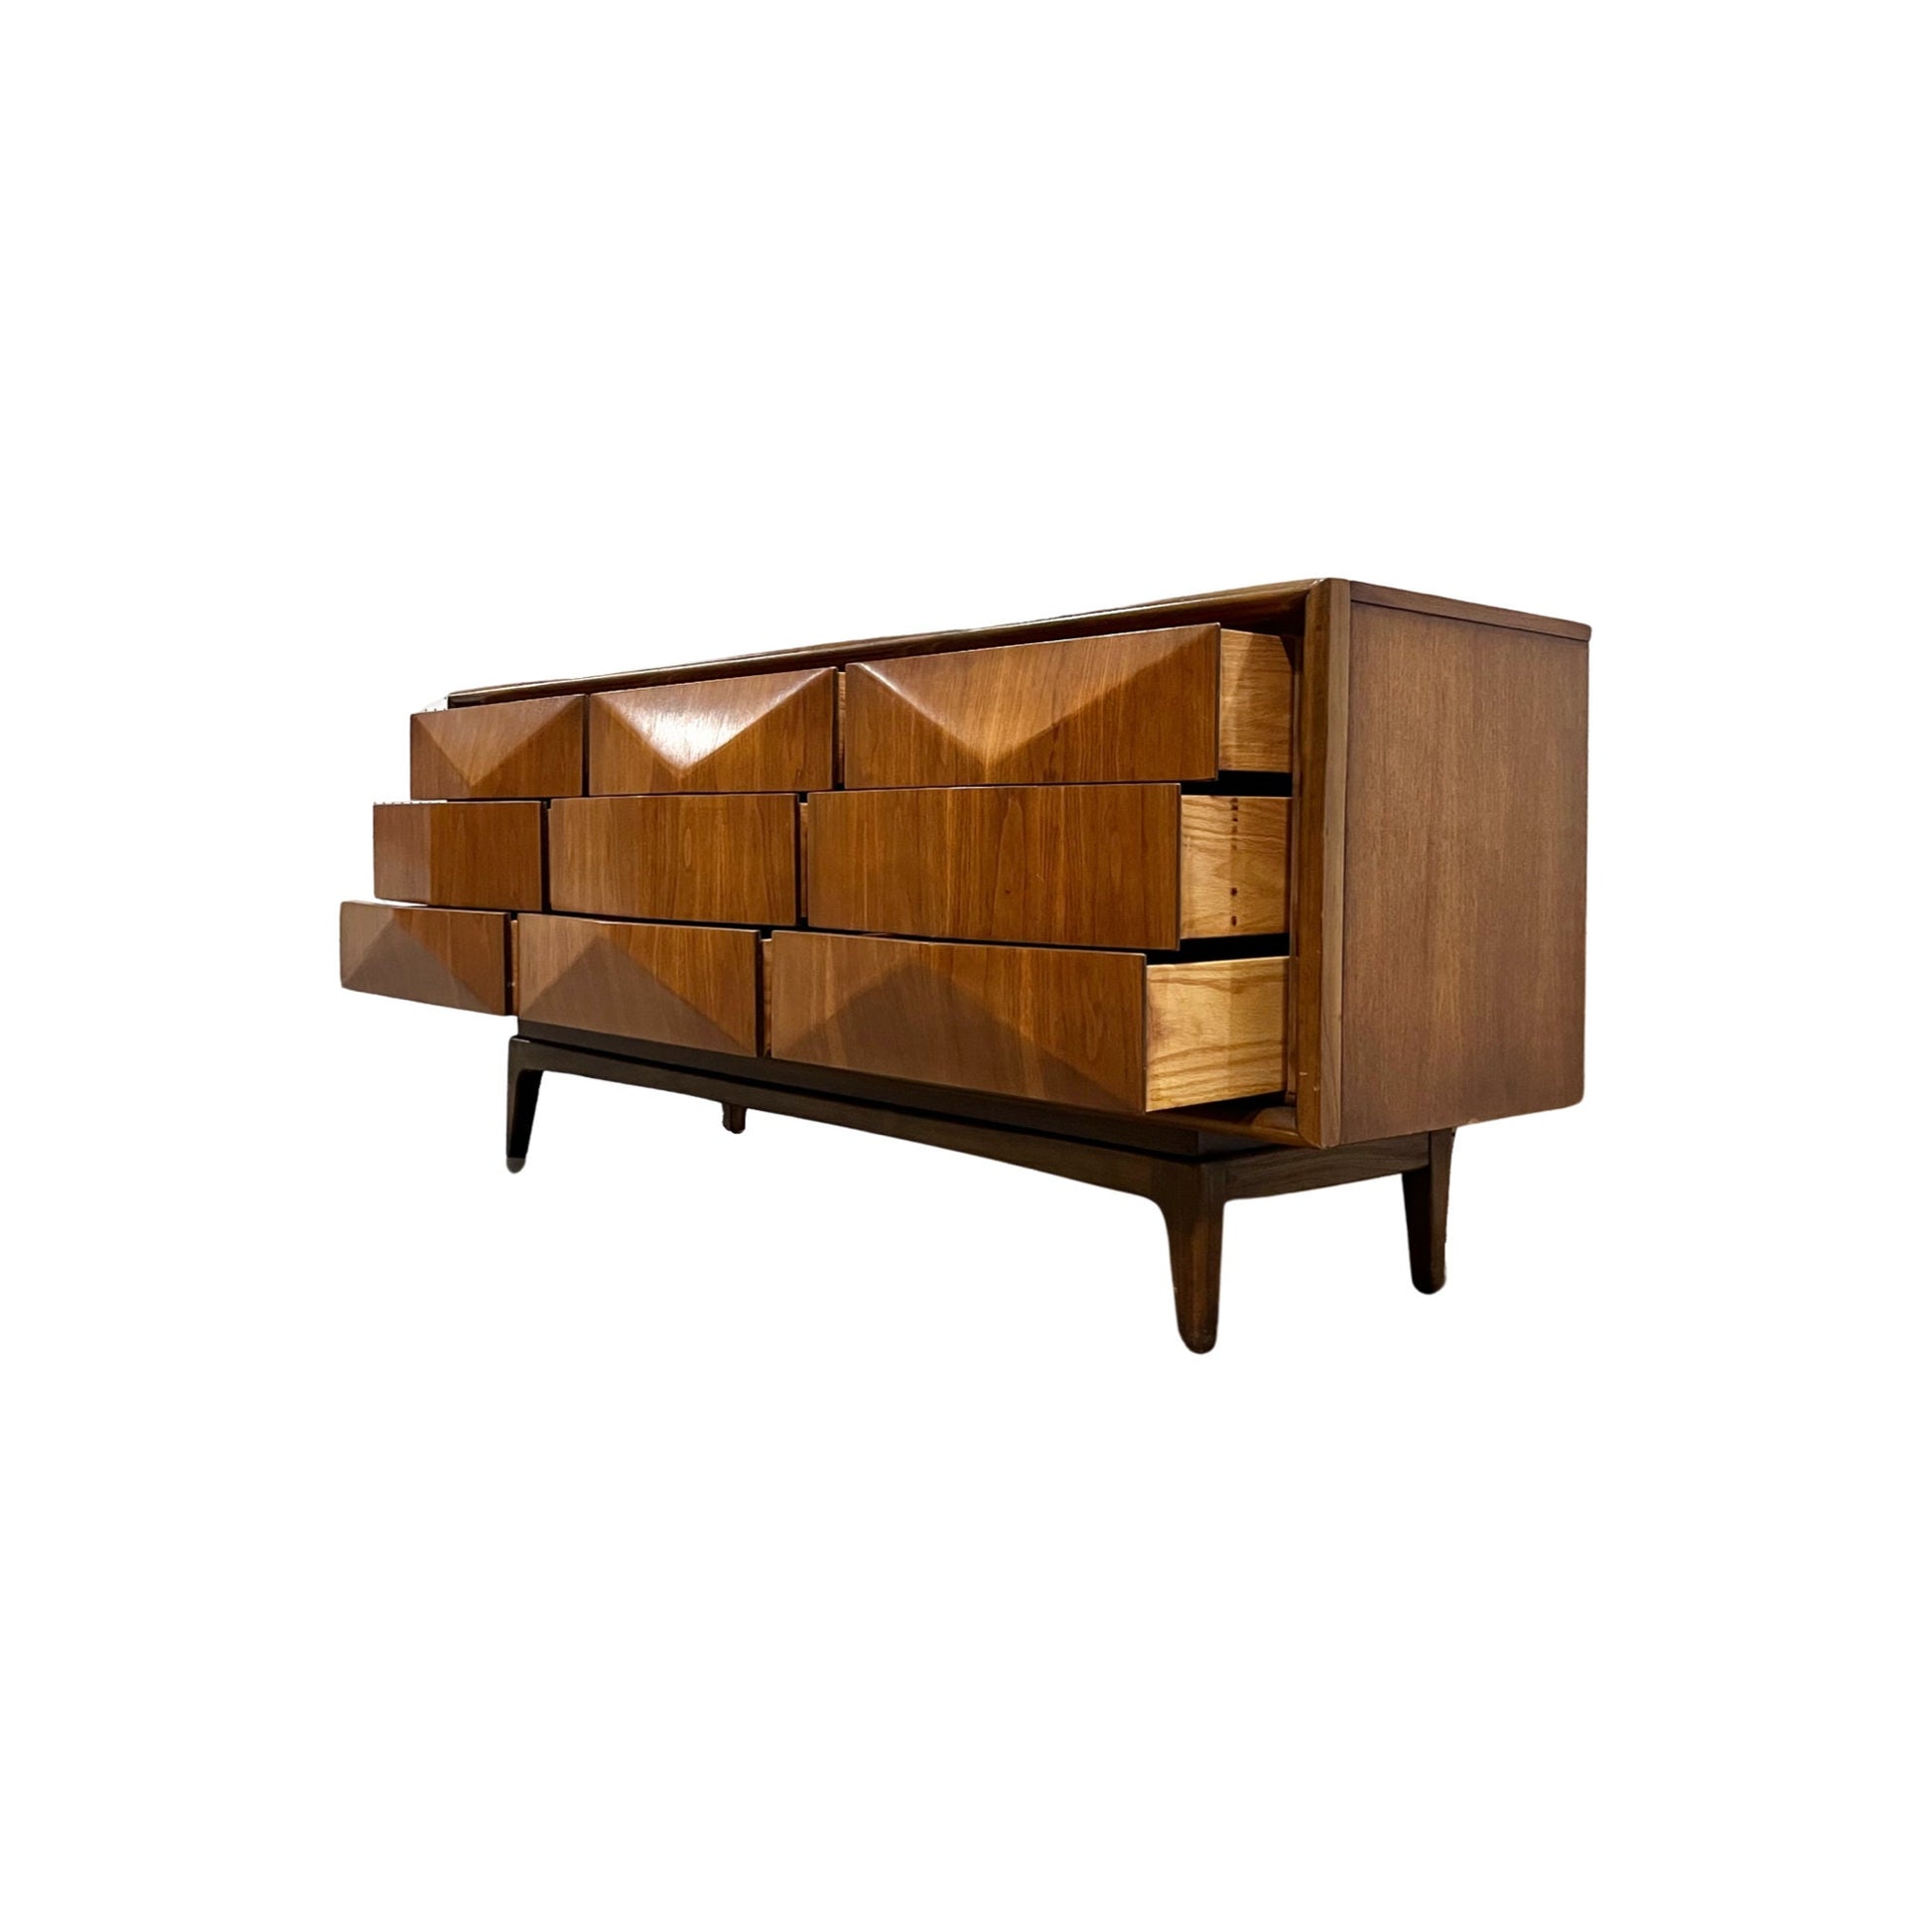 Unique Design and Timeless Aesthetics - United Furniture Co. Mid Century Modern Furniture